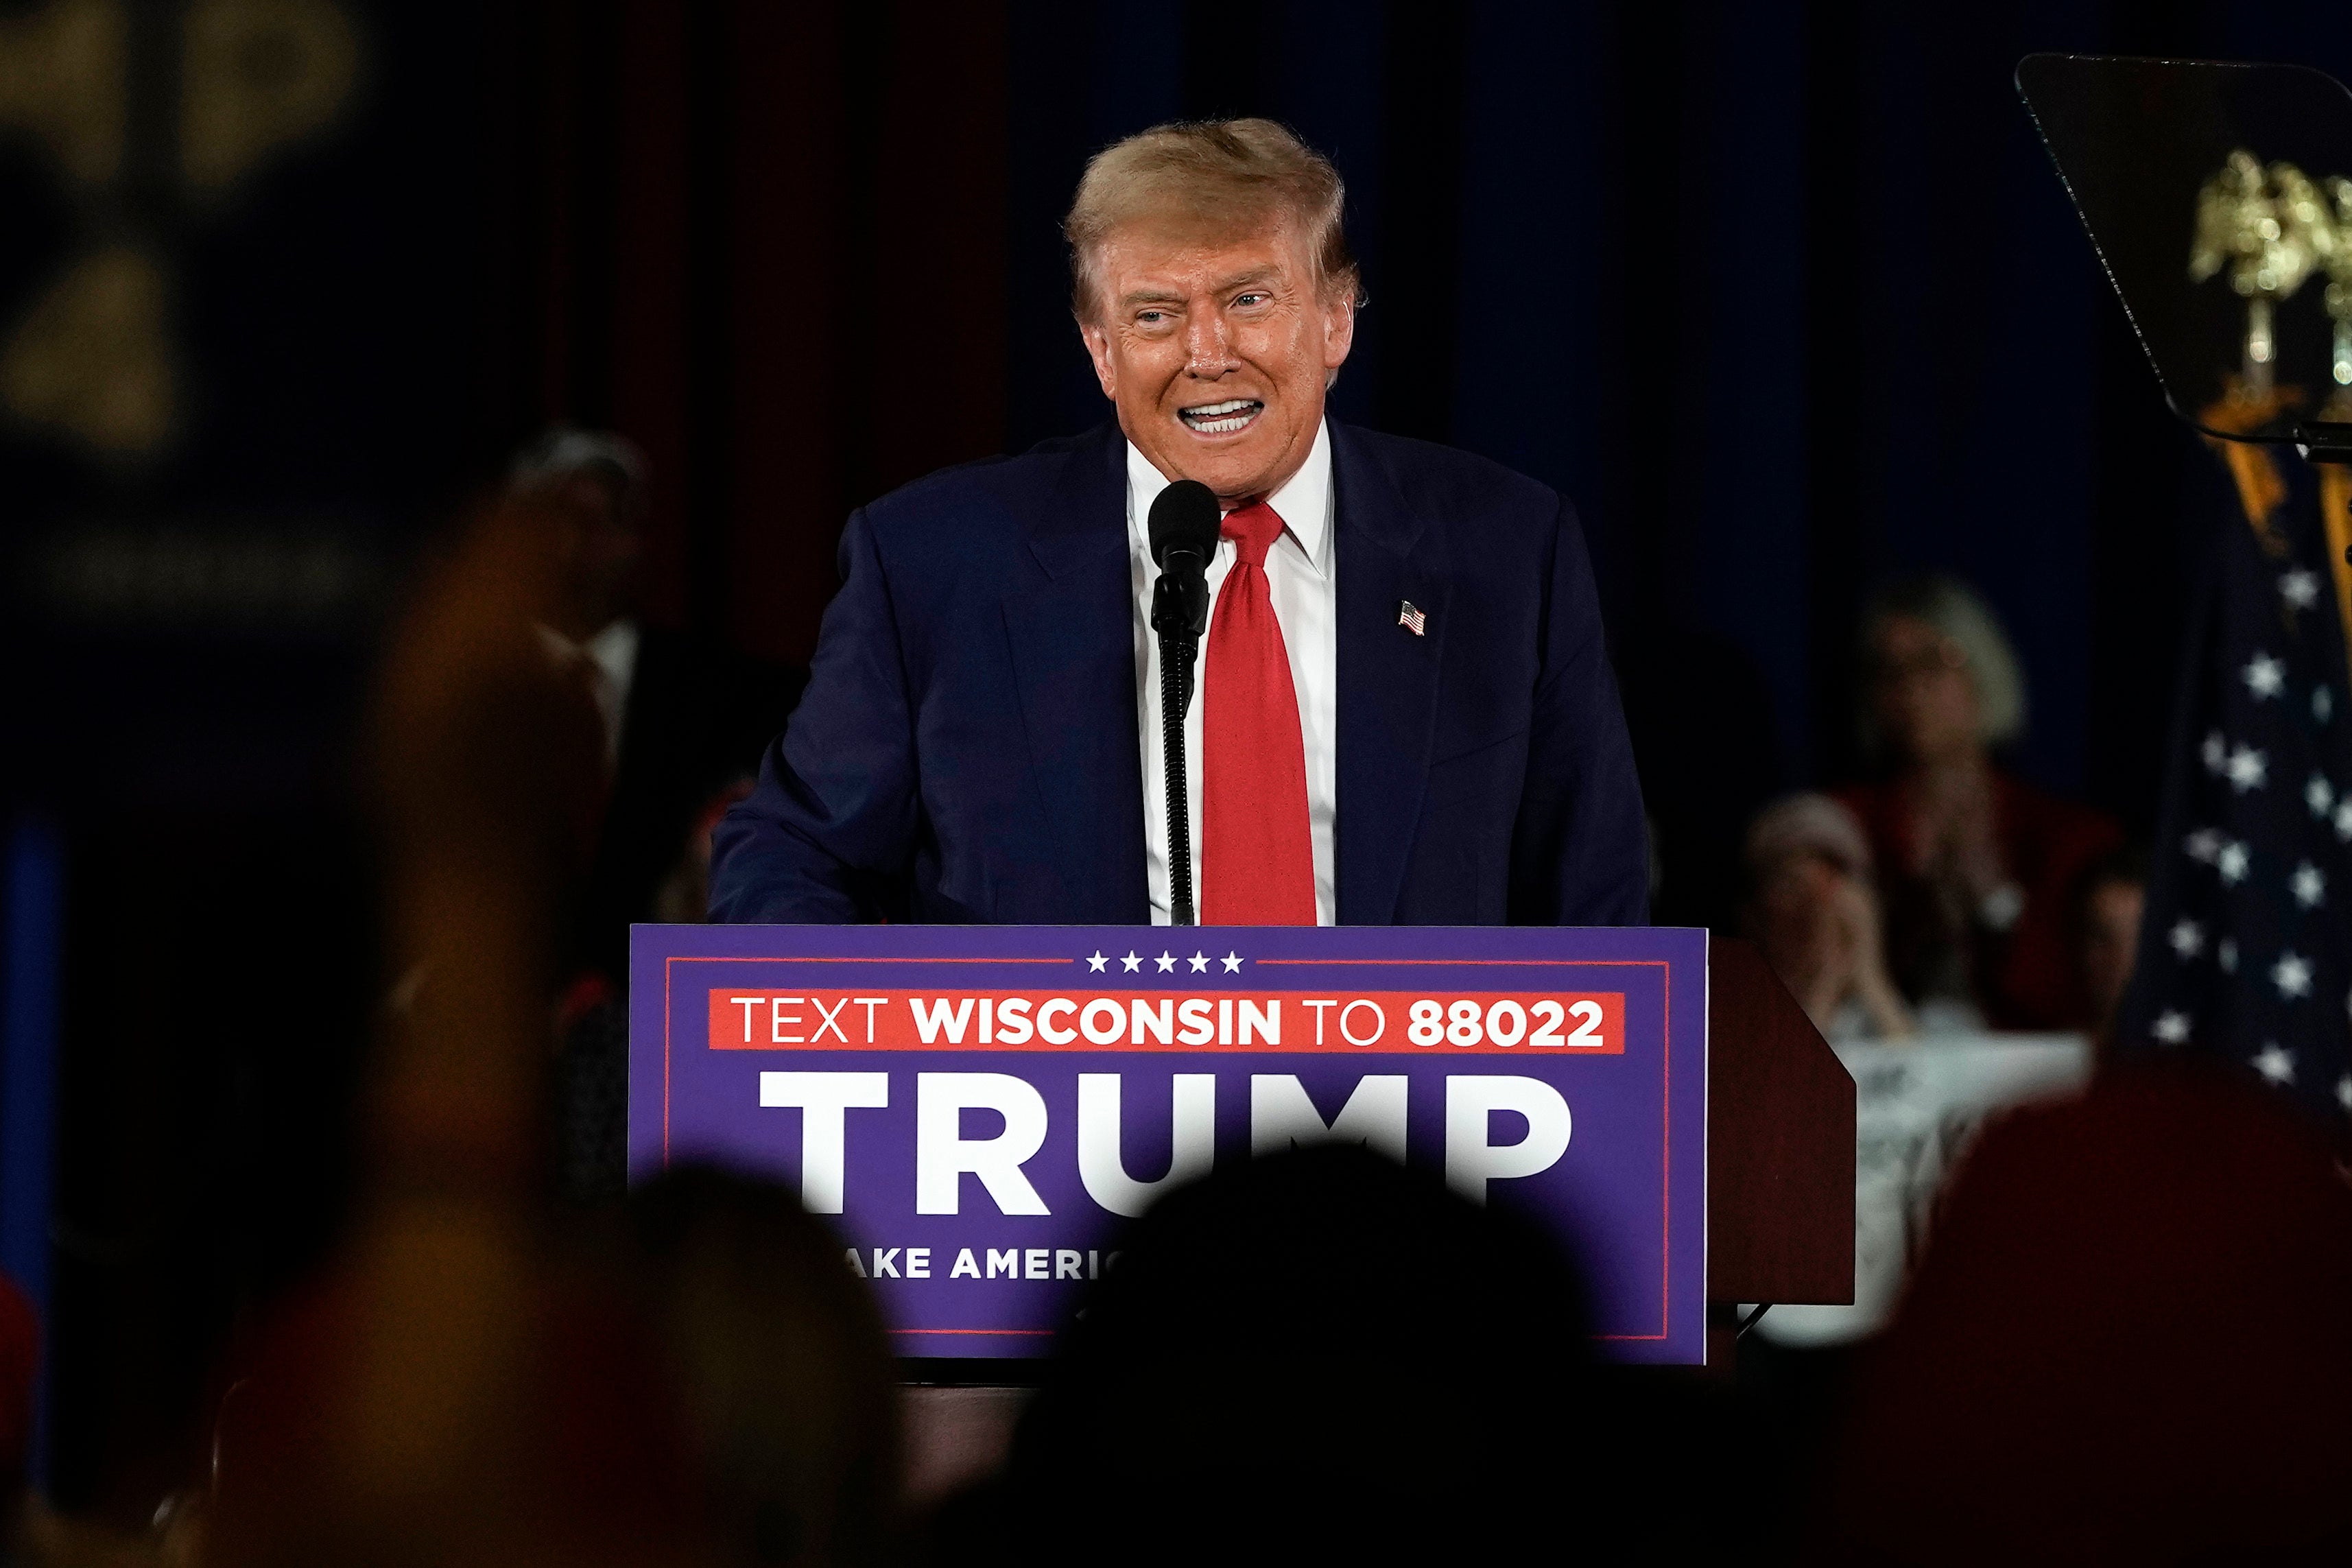 Republican presidential candidate Donald Trump speaks at a campaign rally in Waukesha, Wisconsin, on 1 May 2024